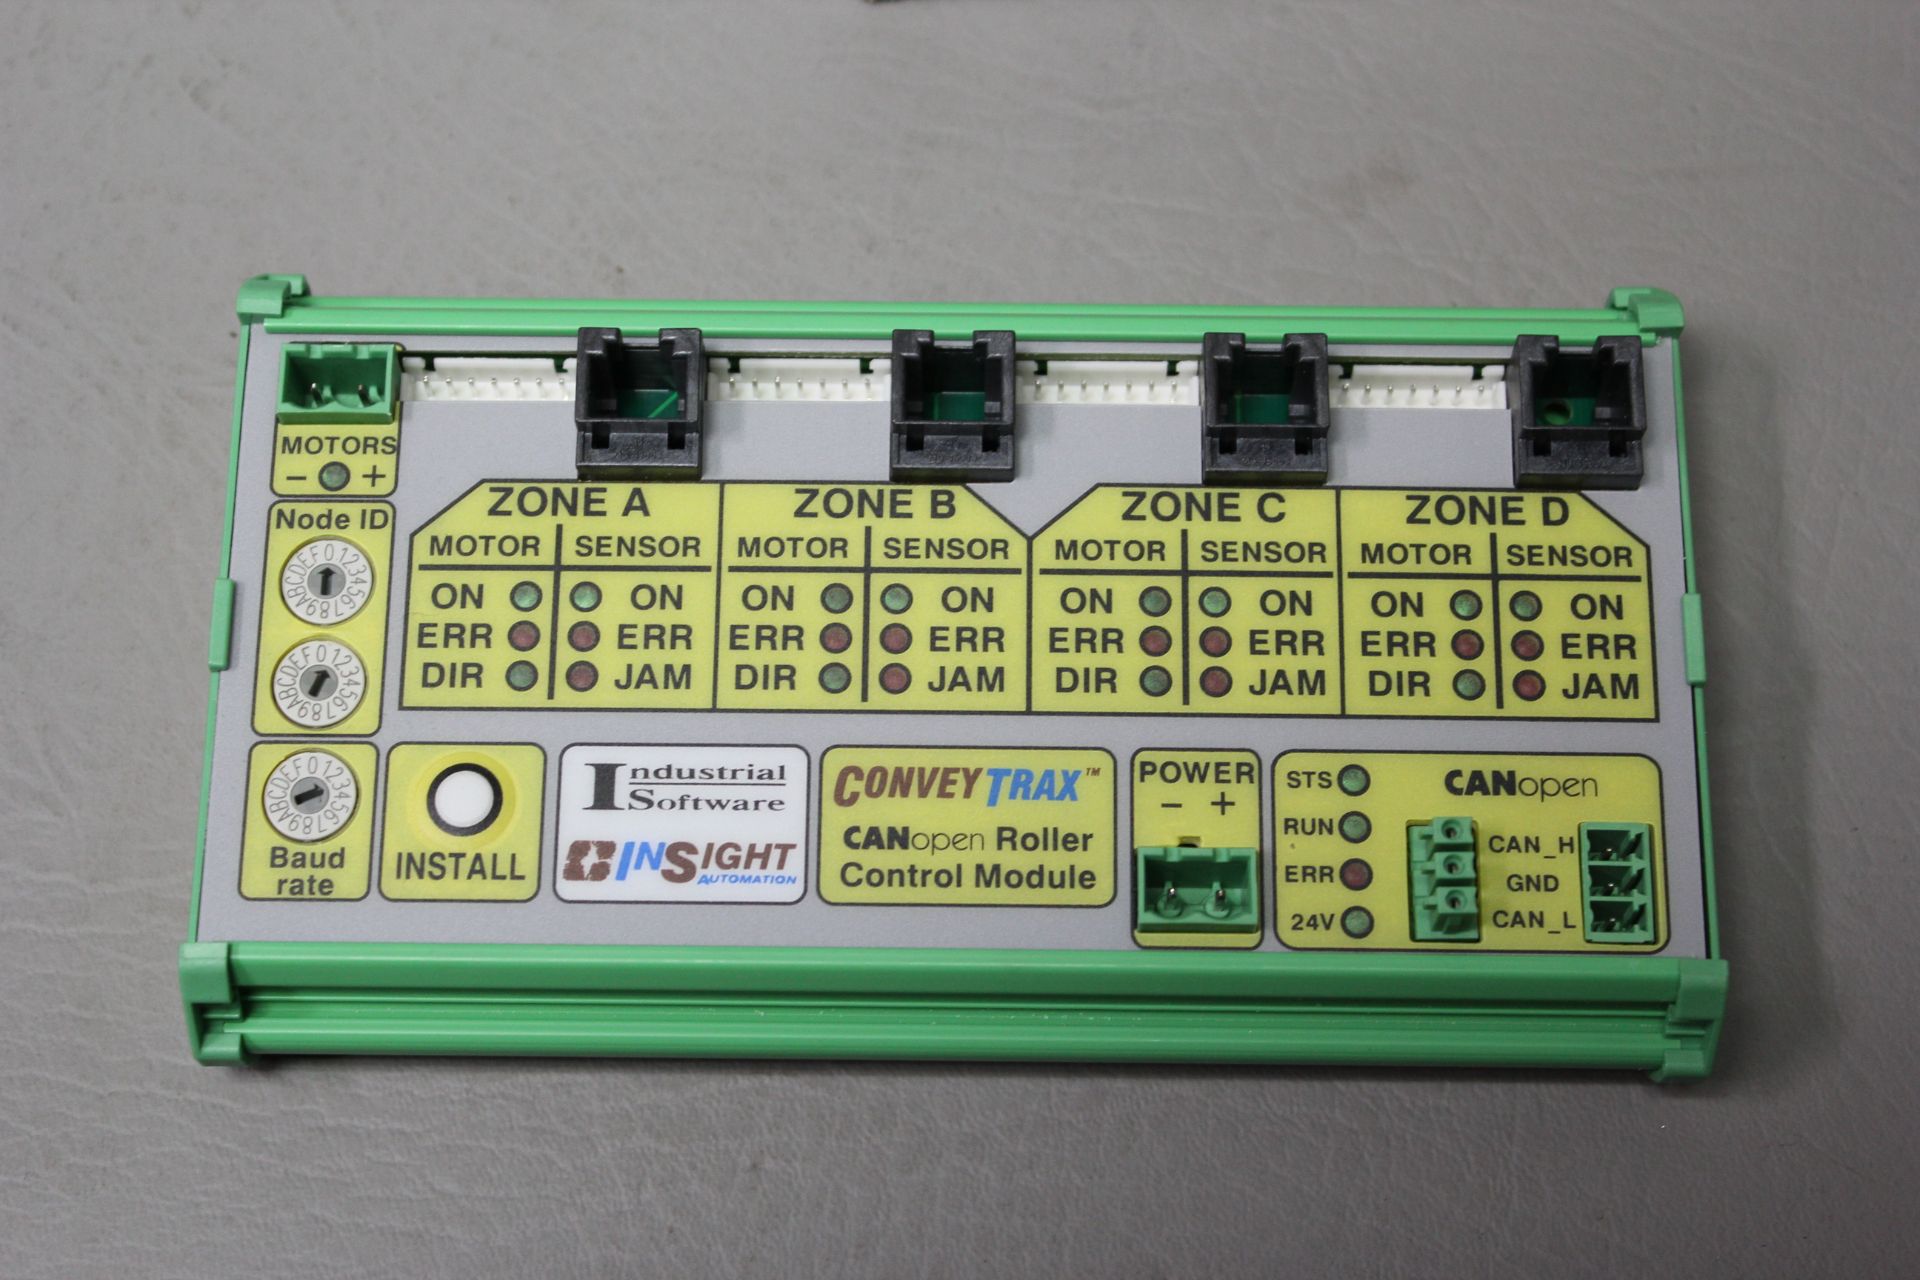 NEW INSIGHT AUTOMATION CONVEYTRAX CANopen ROLLER CONTROL MODULE - Image 4 of 6